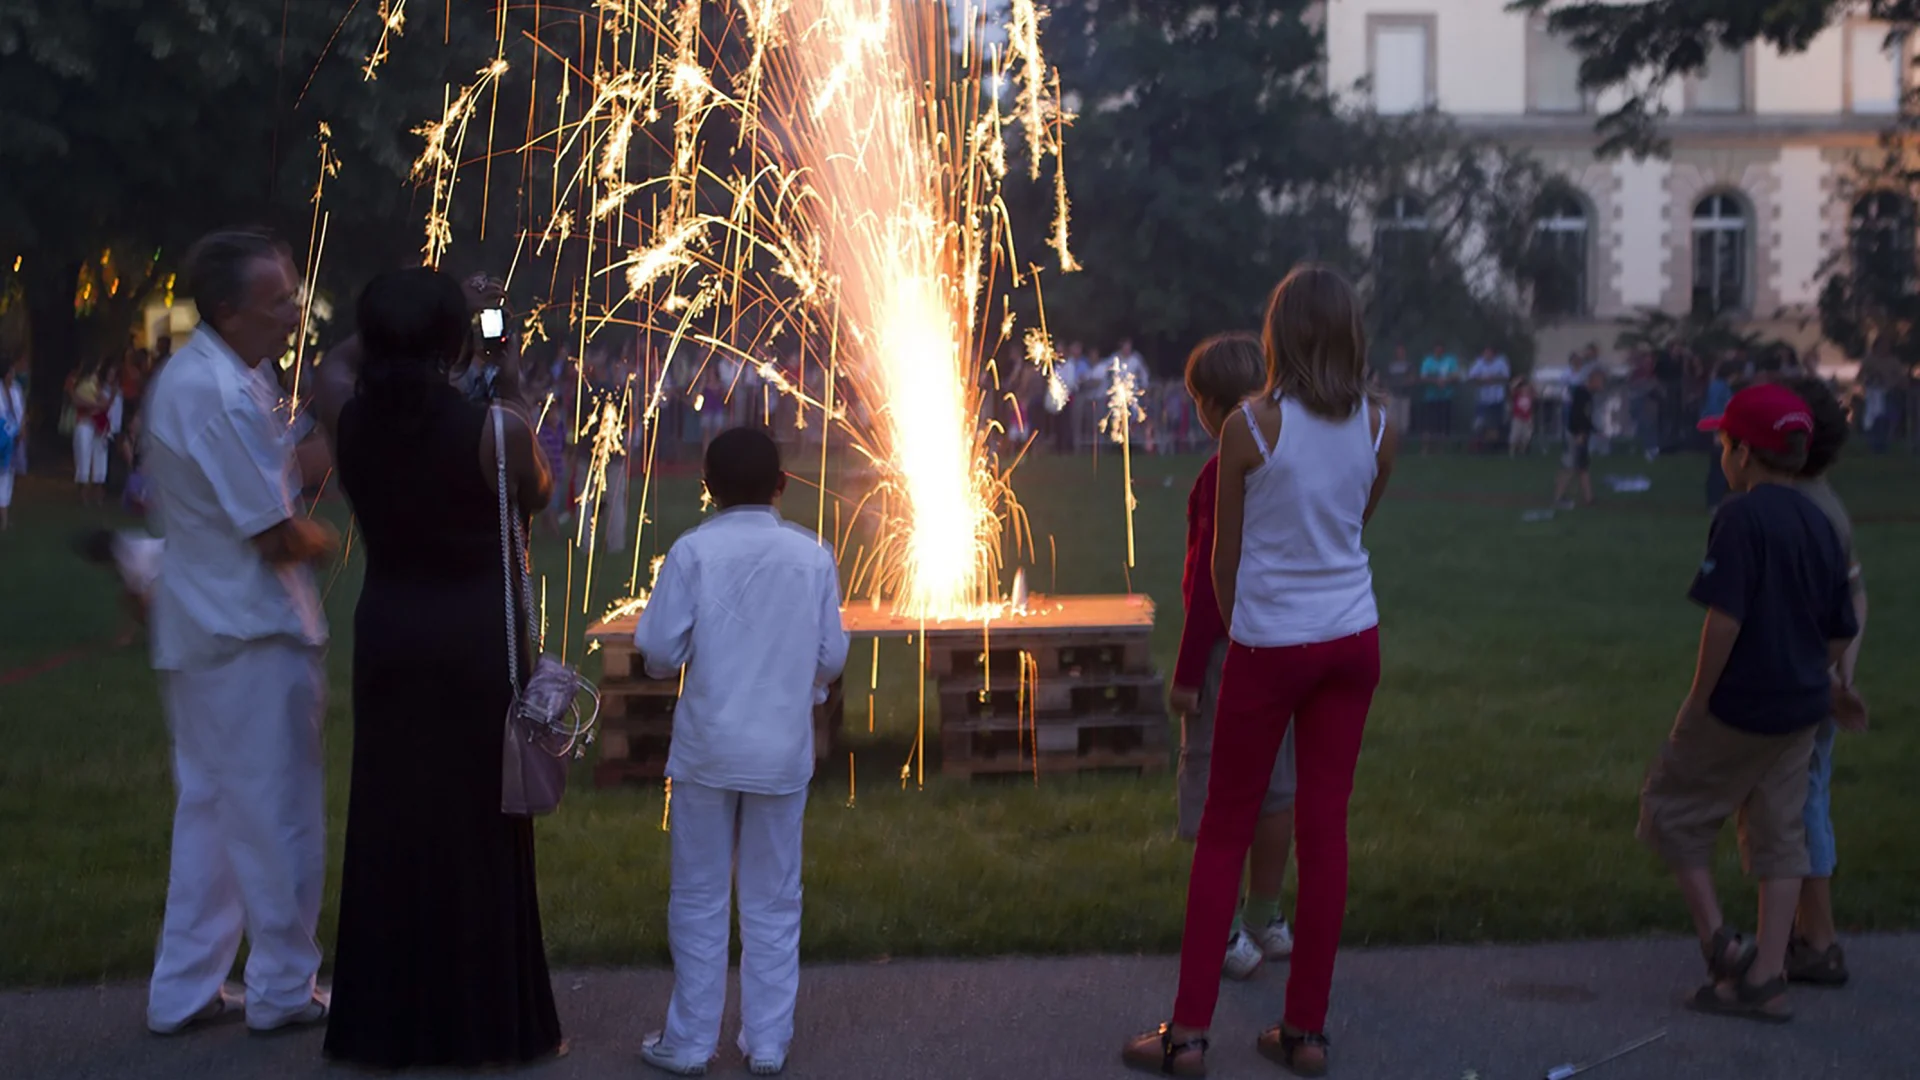 Adults and children enjoying a shower of sparks from a fountain firework.